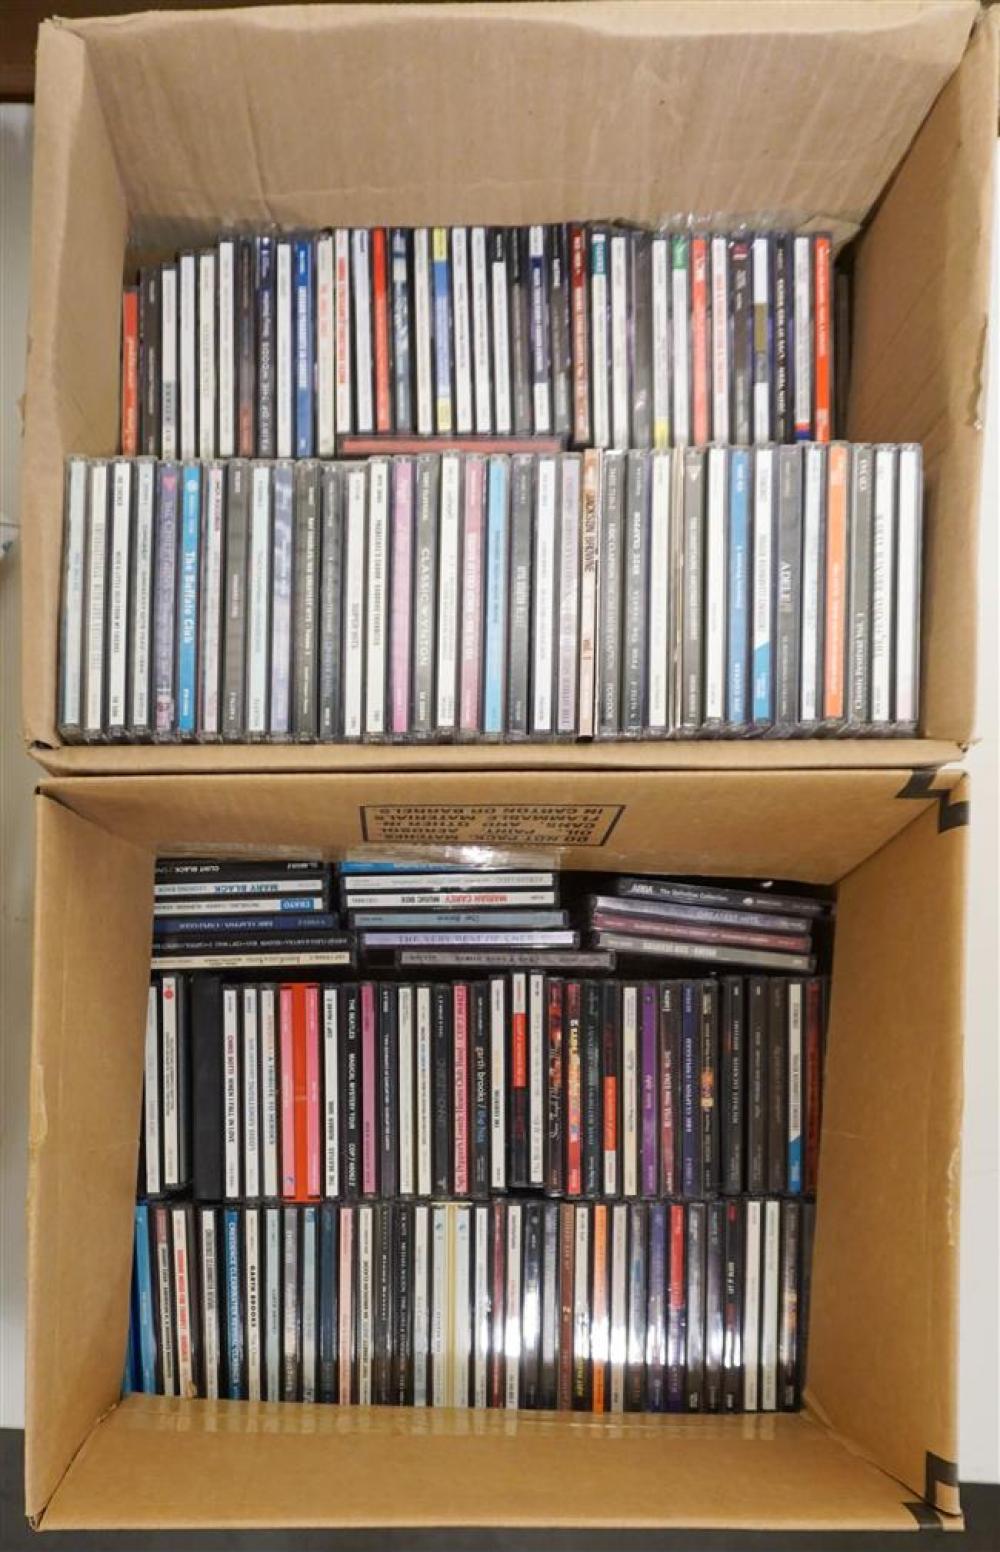 TWO BOXES OF CDSTwo Boxes of CDs 3232c6